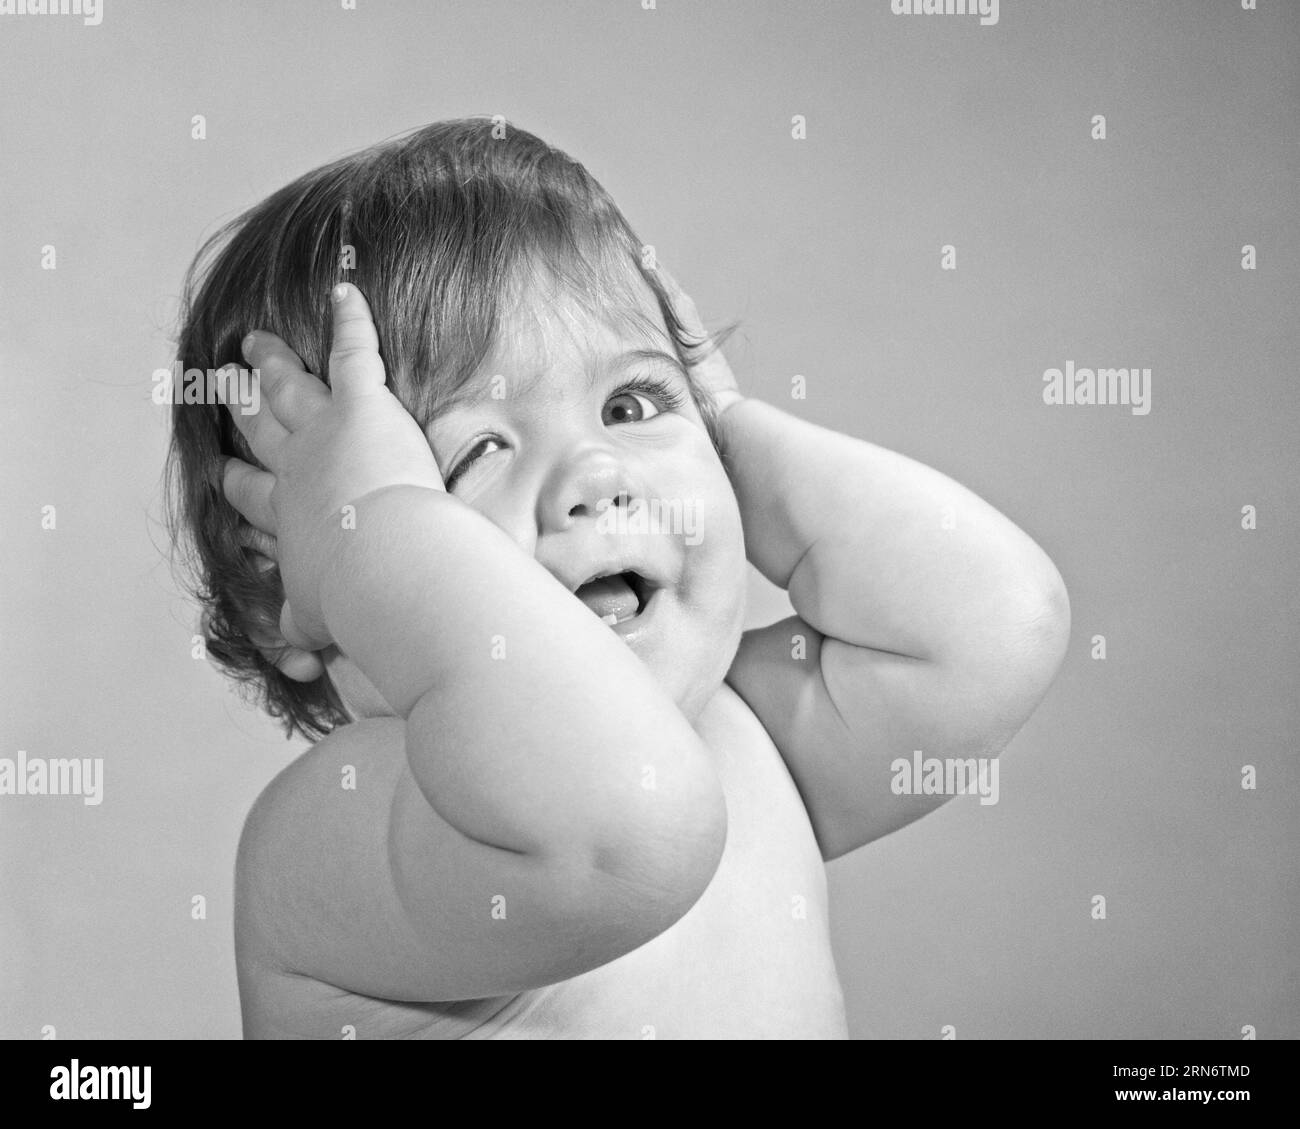 1960s FUNNY FACIAL EXPRESSION BABY GIRL HOLD HEAD WITH HER HANDS PULLING DOWN ONE EYE - b22733 HAR001 HARS COPY SPACE GESTURING EXPRESSIONS B&W EYE CONTACT HUMOROUS HEAD AND SHOULDERS EXCITEMENT COMICAL GESTURES COMEDY PLEASANT AGREEABLE CHARMING GROWTH JUVENILES LOVABLE PLEASING ADORABLE APPEALING BLACK AND WHITE CAUCASIAN ETHNICITY HAR001 OLD FASHIONED Stock Photo